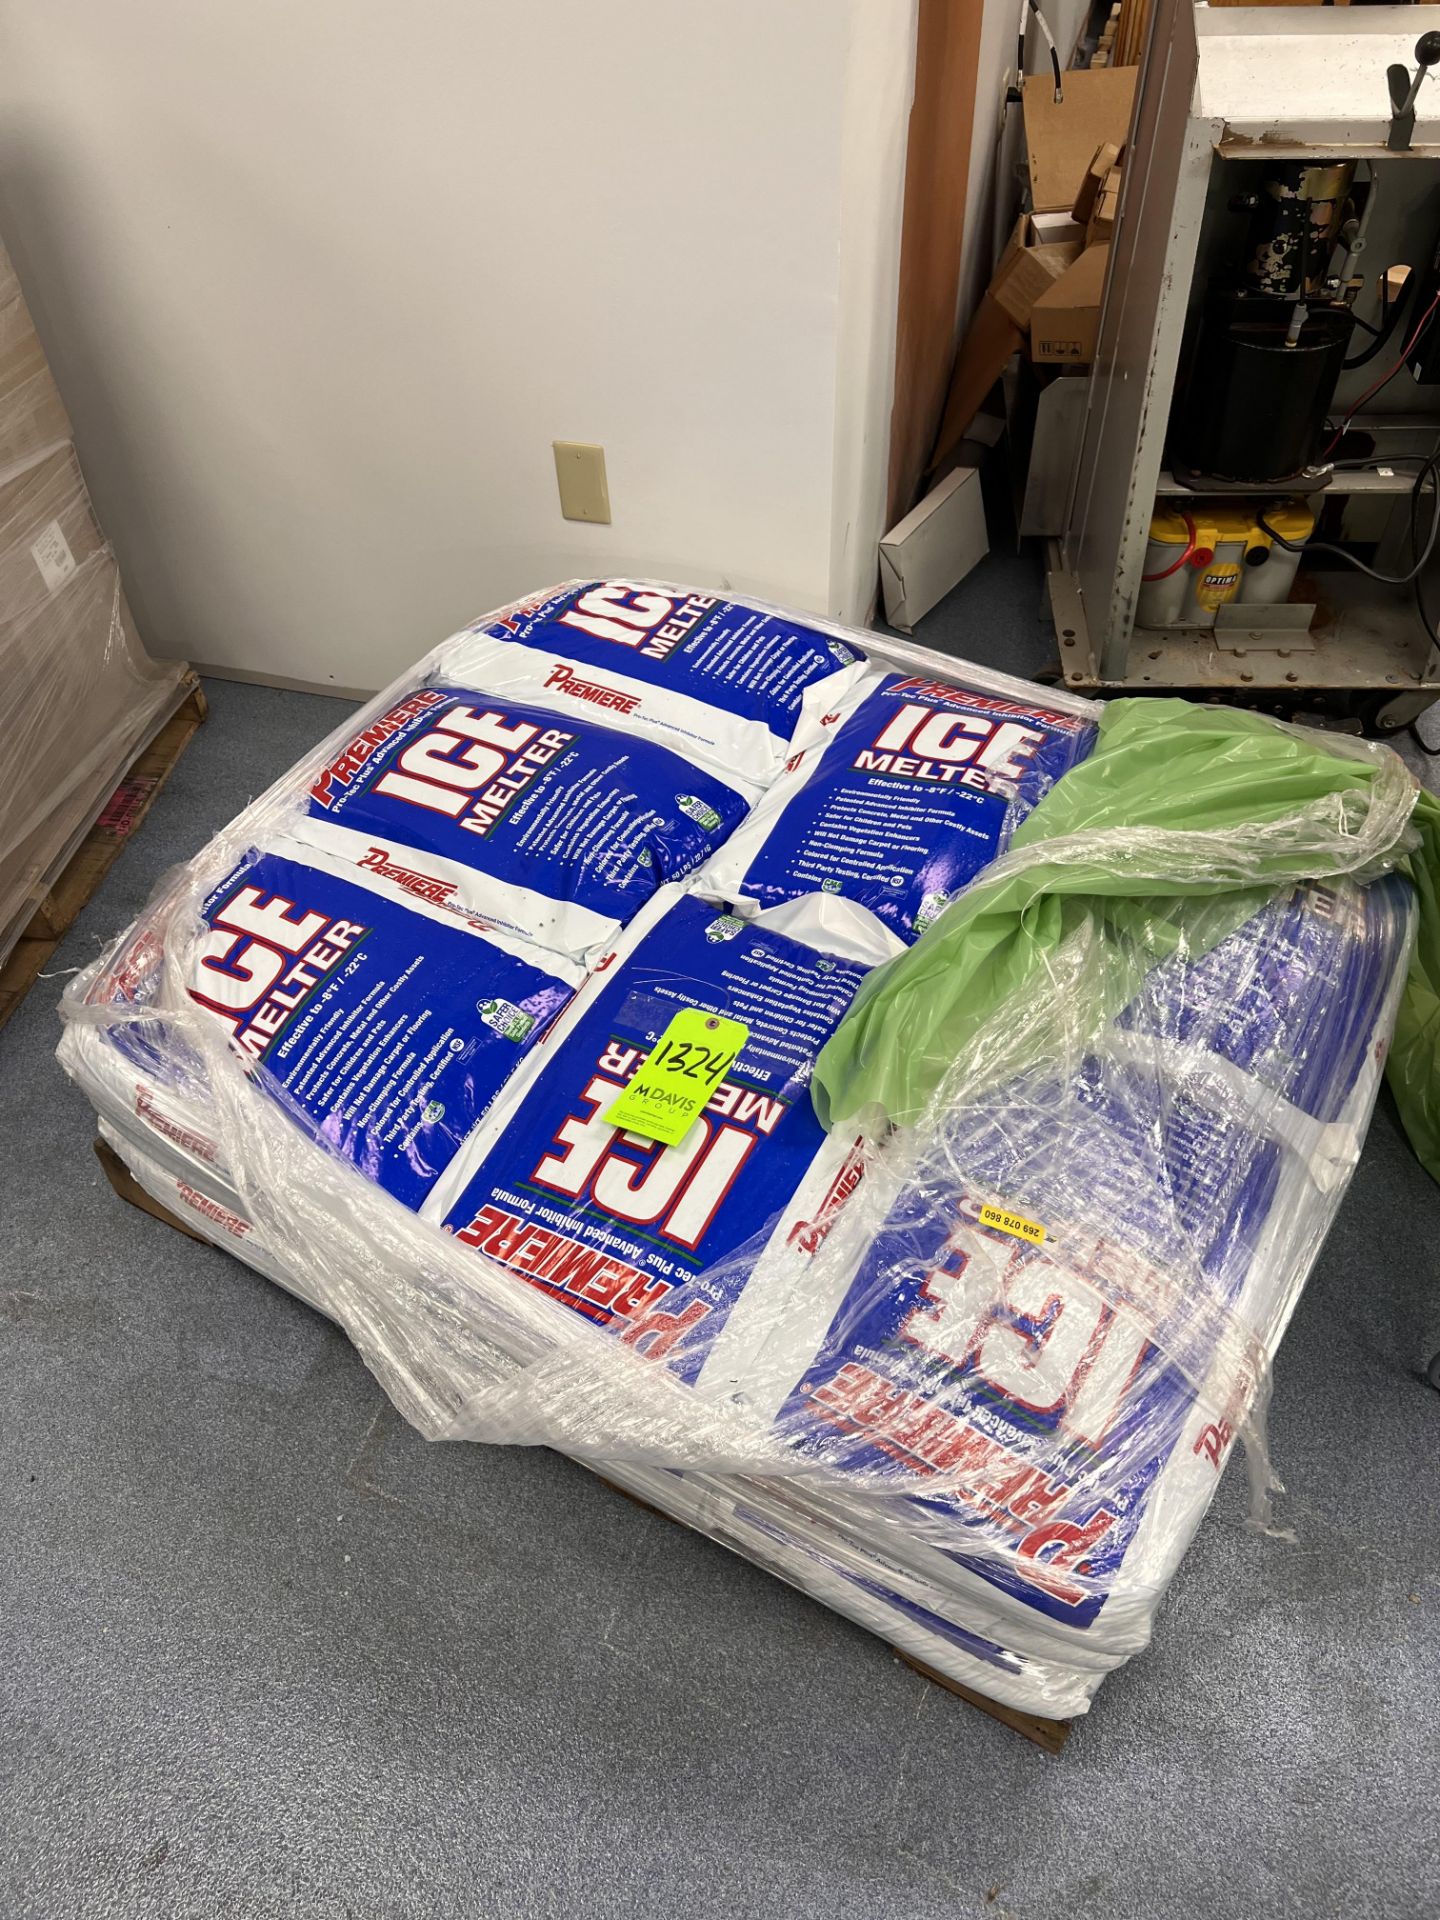 (21) BAGS OF PREMIERE ICE MELTER